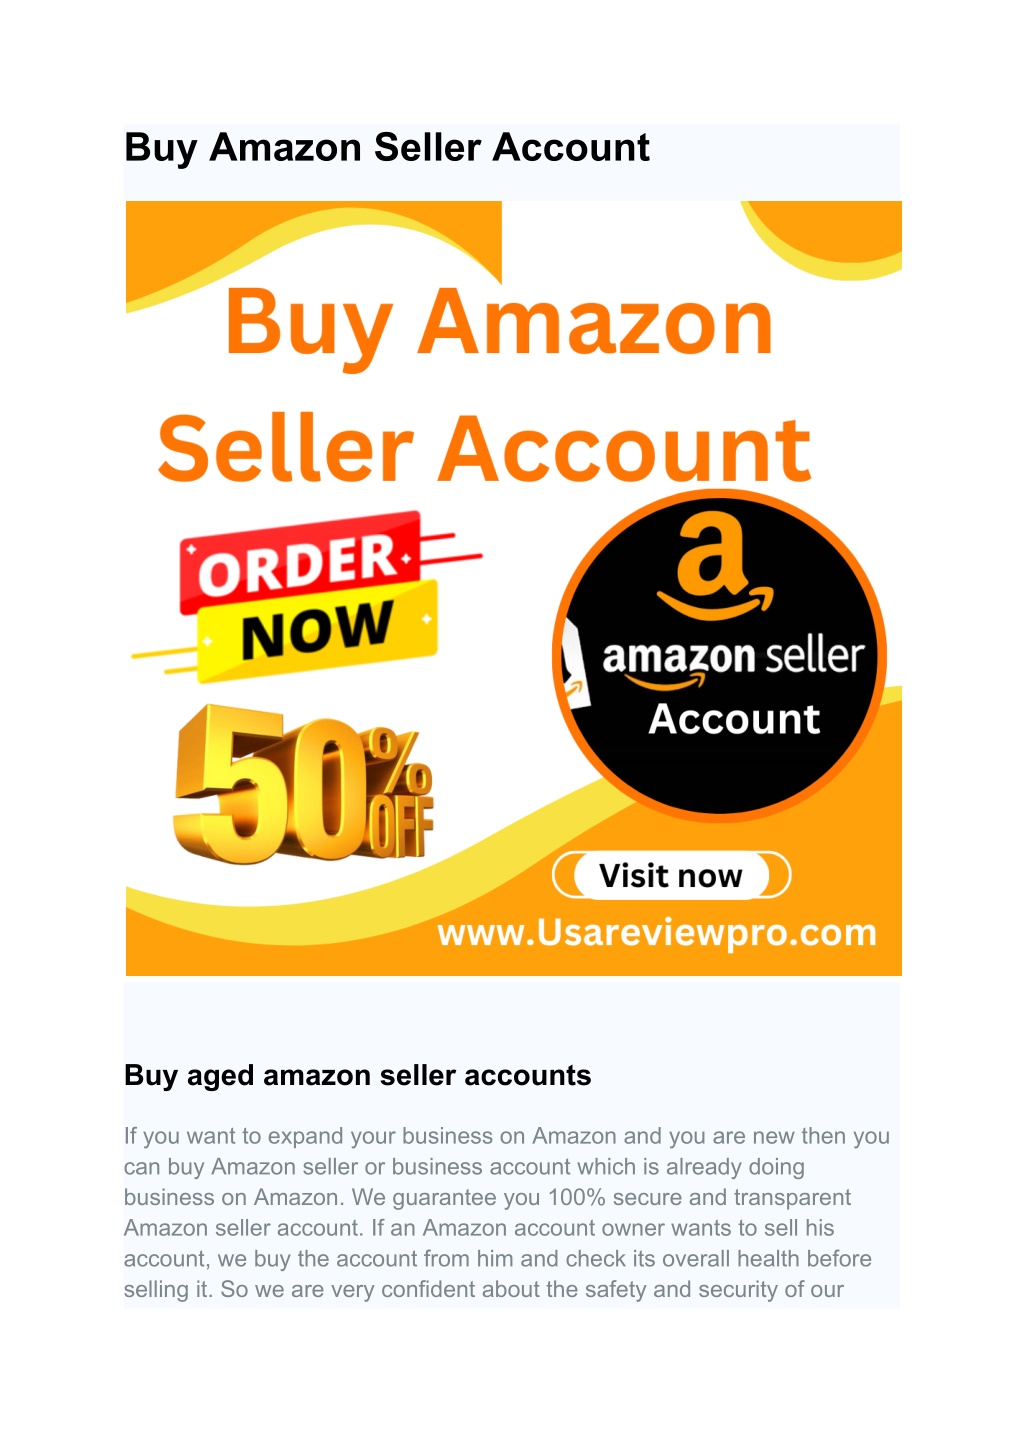 How Many Amazon Seller Accounts Can I Have?